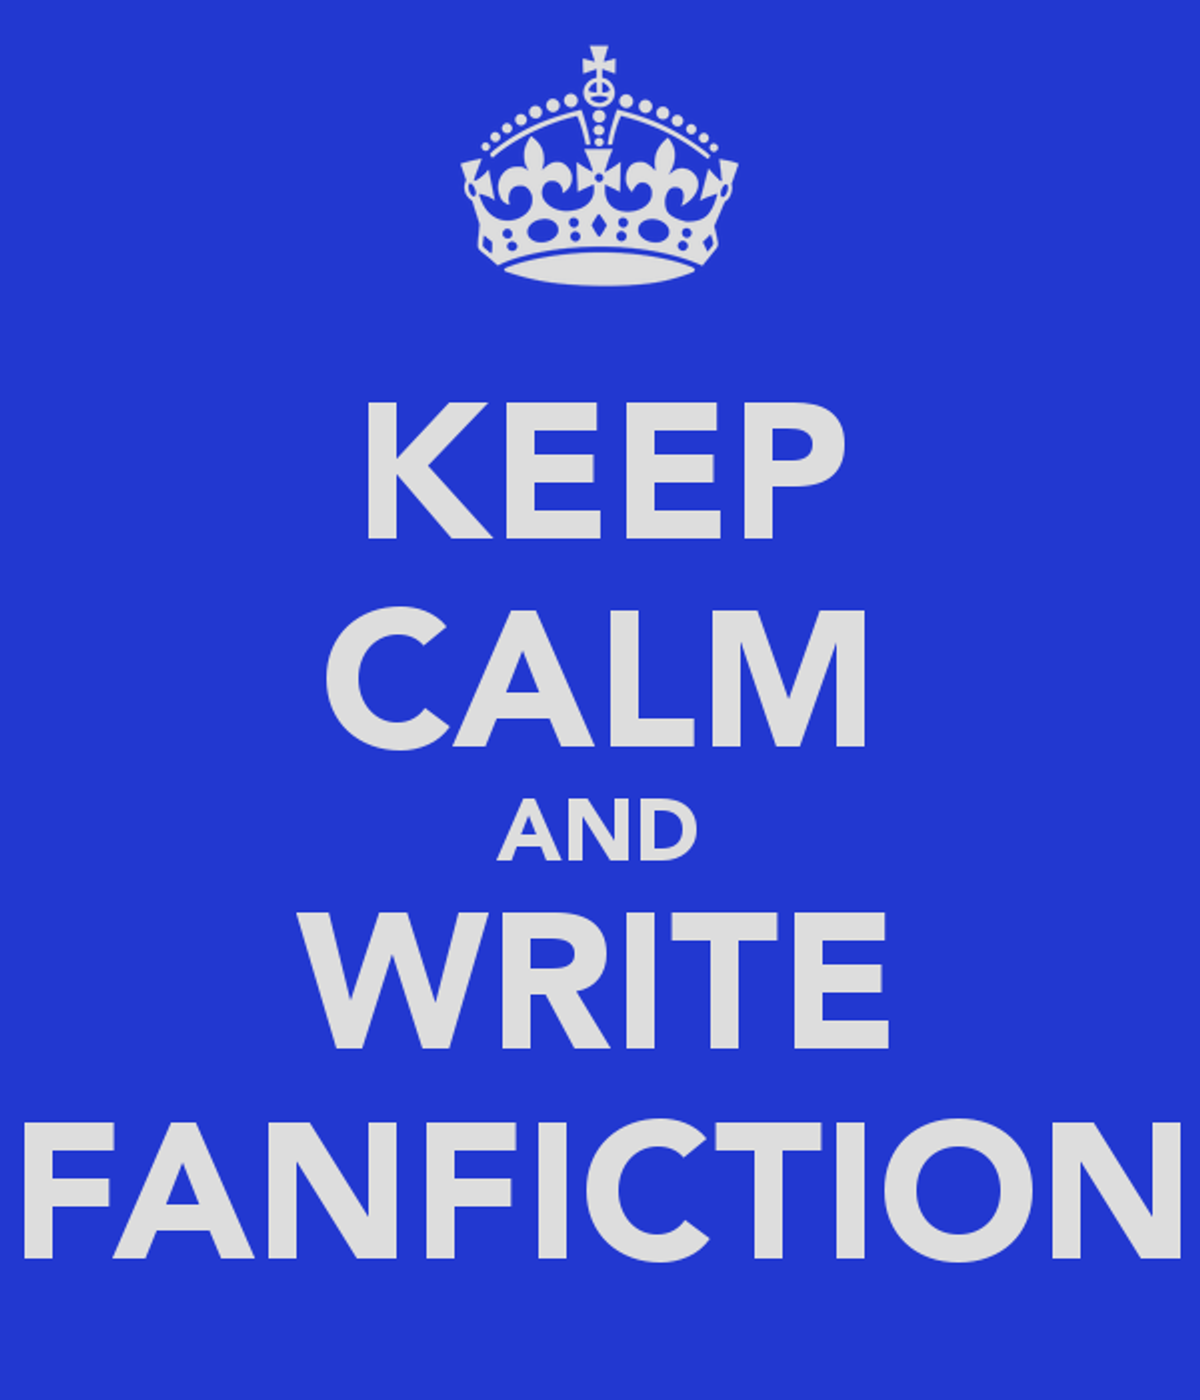 Fanfiction: The Phenomenon Expanded